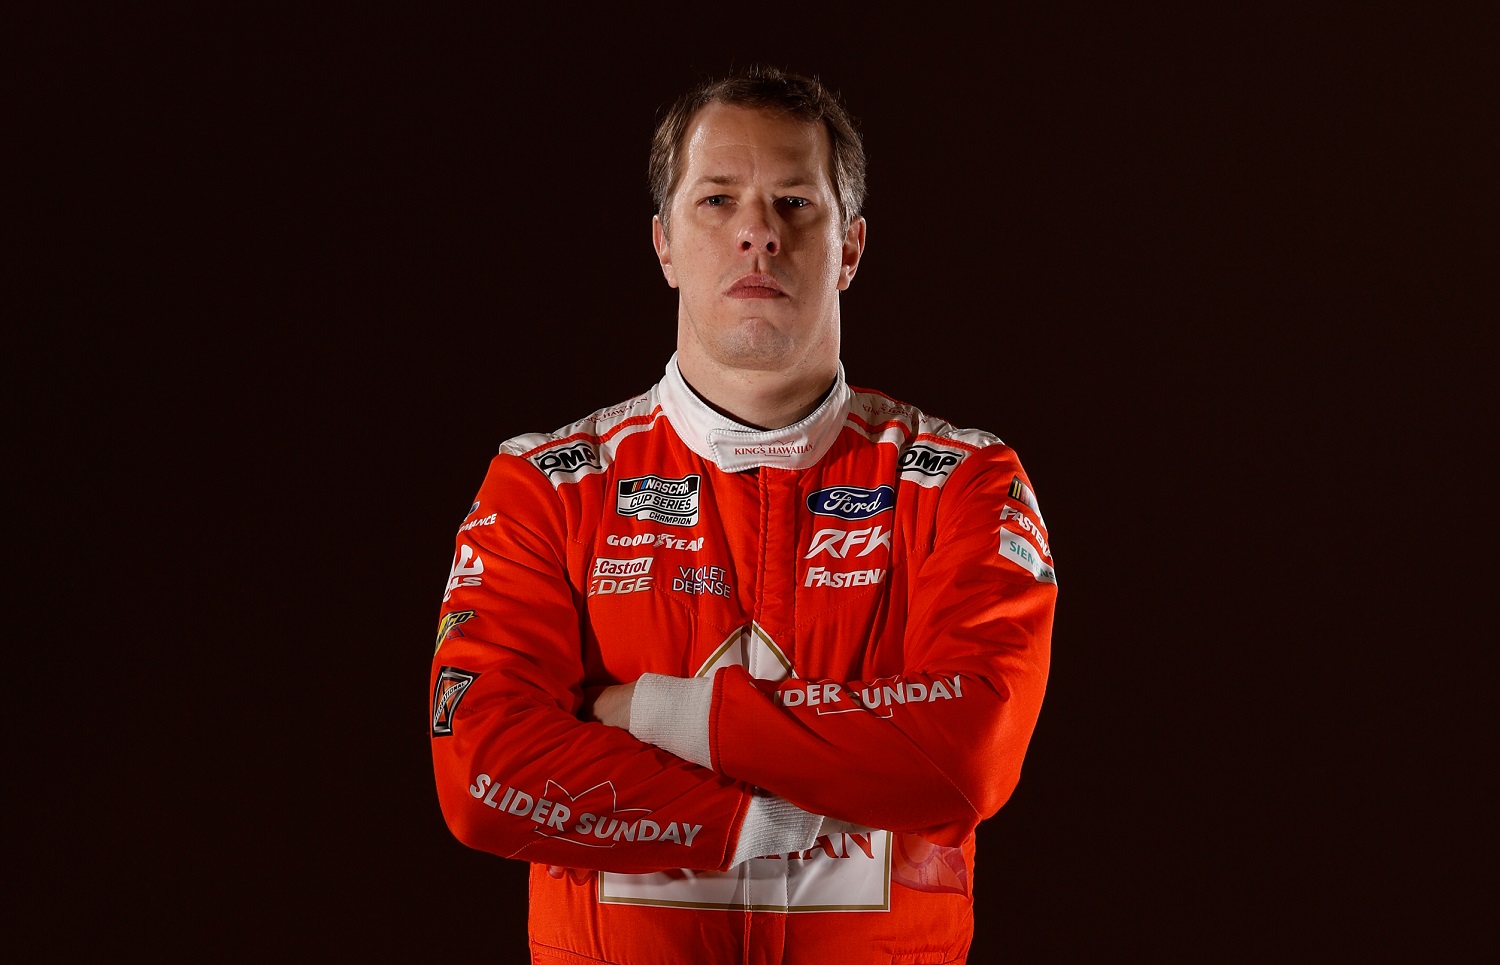 If Brad Keselowski Isn’t Being Vengeful, Then He’s at Least Being Ironic